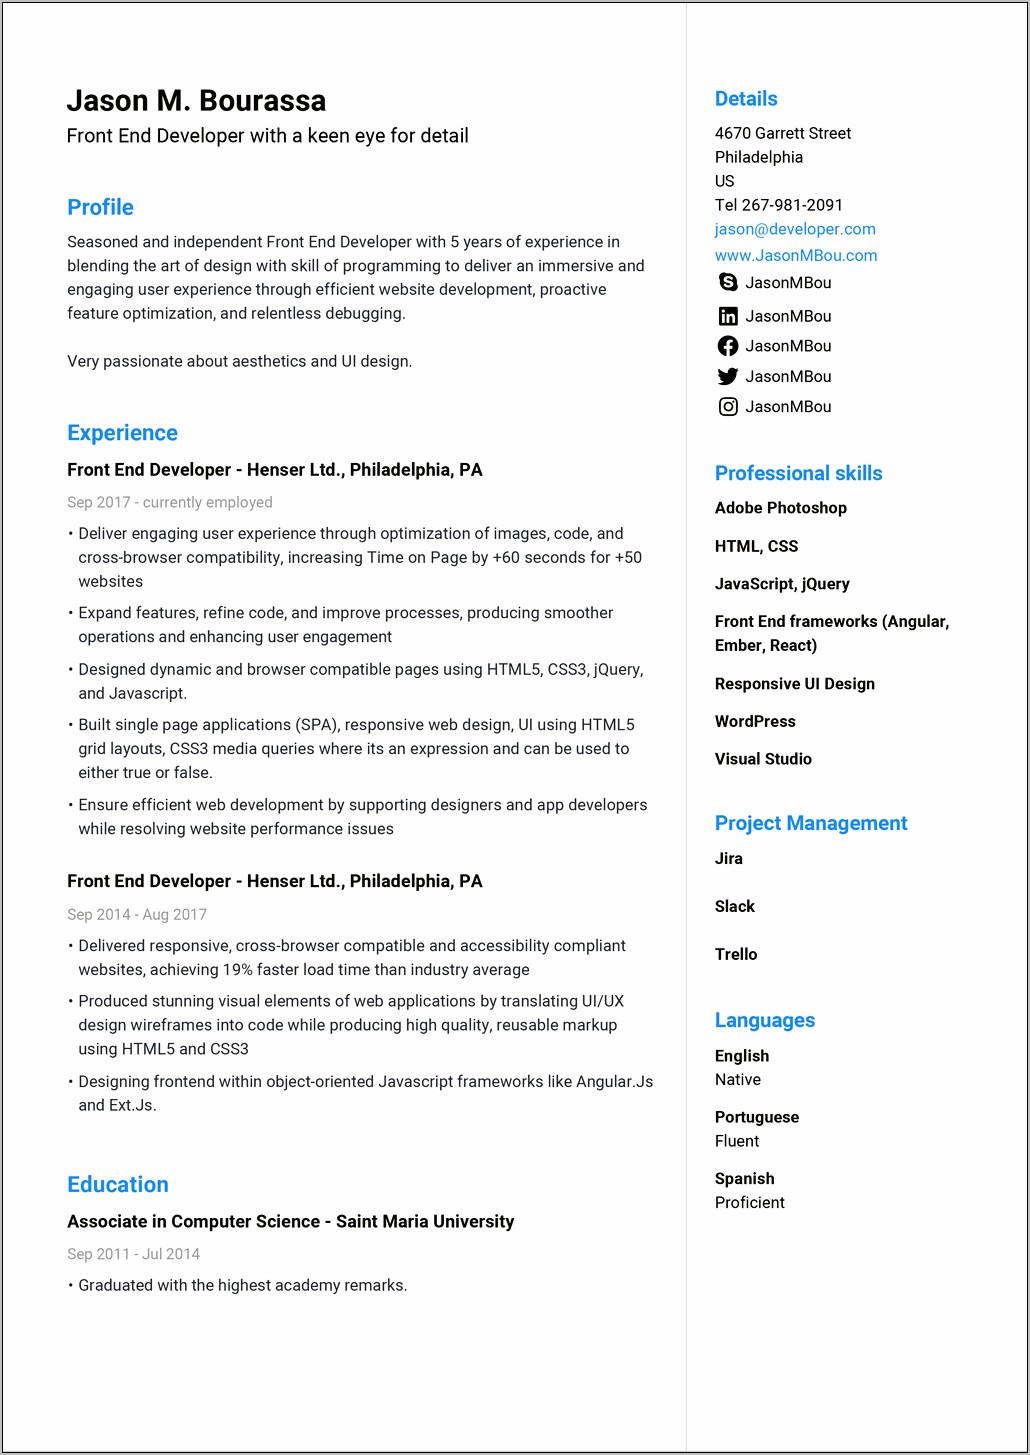 Put Object Oriented Design On Resume